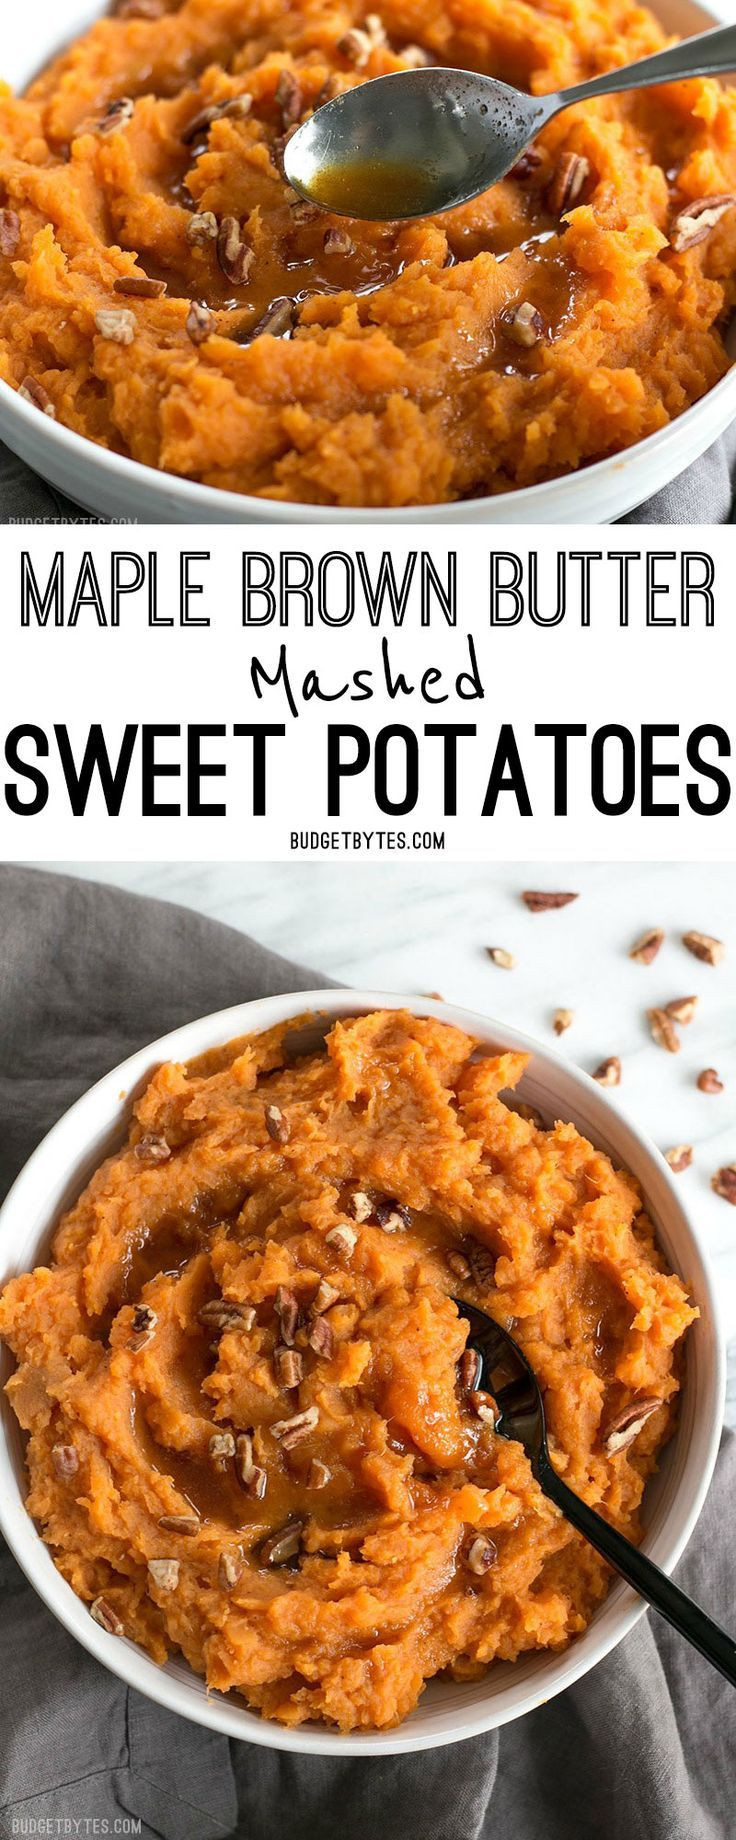 Mashed Sweet Potatoes Thanksgiving
 25 Best Ideas about Thanksgiving on Pinterest